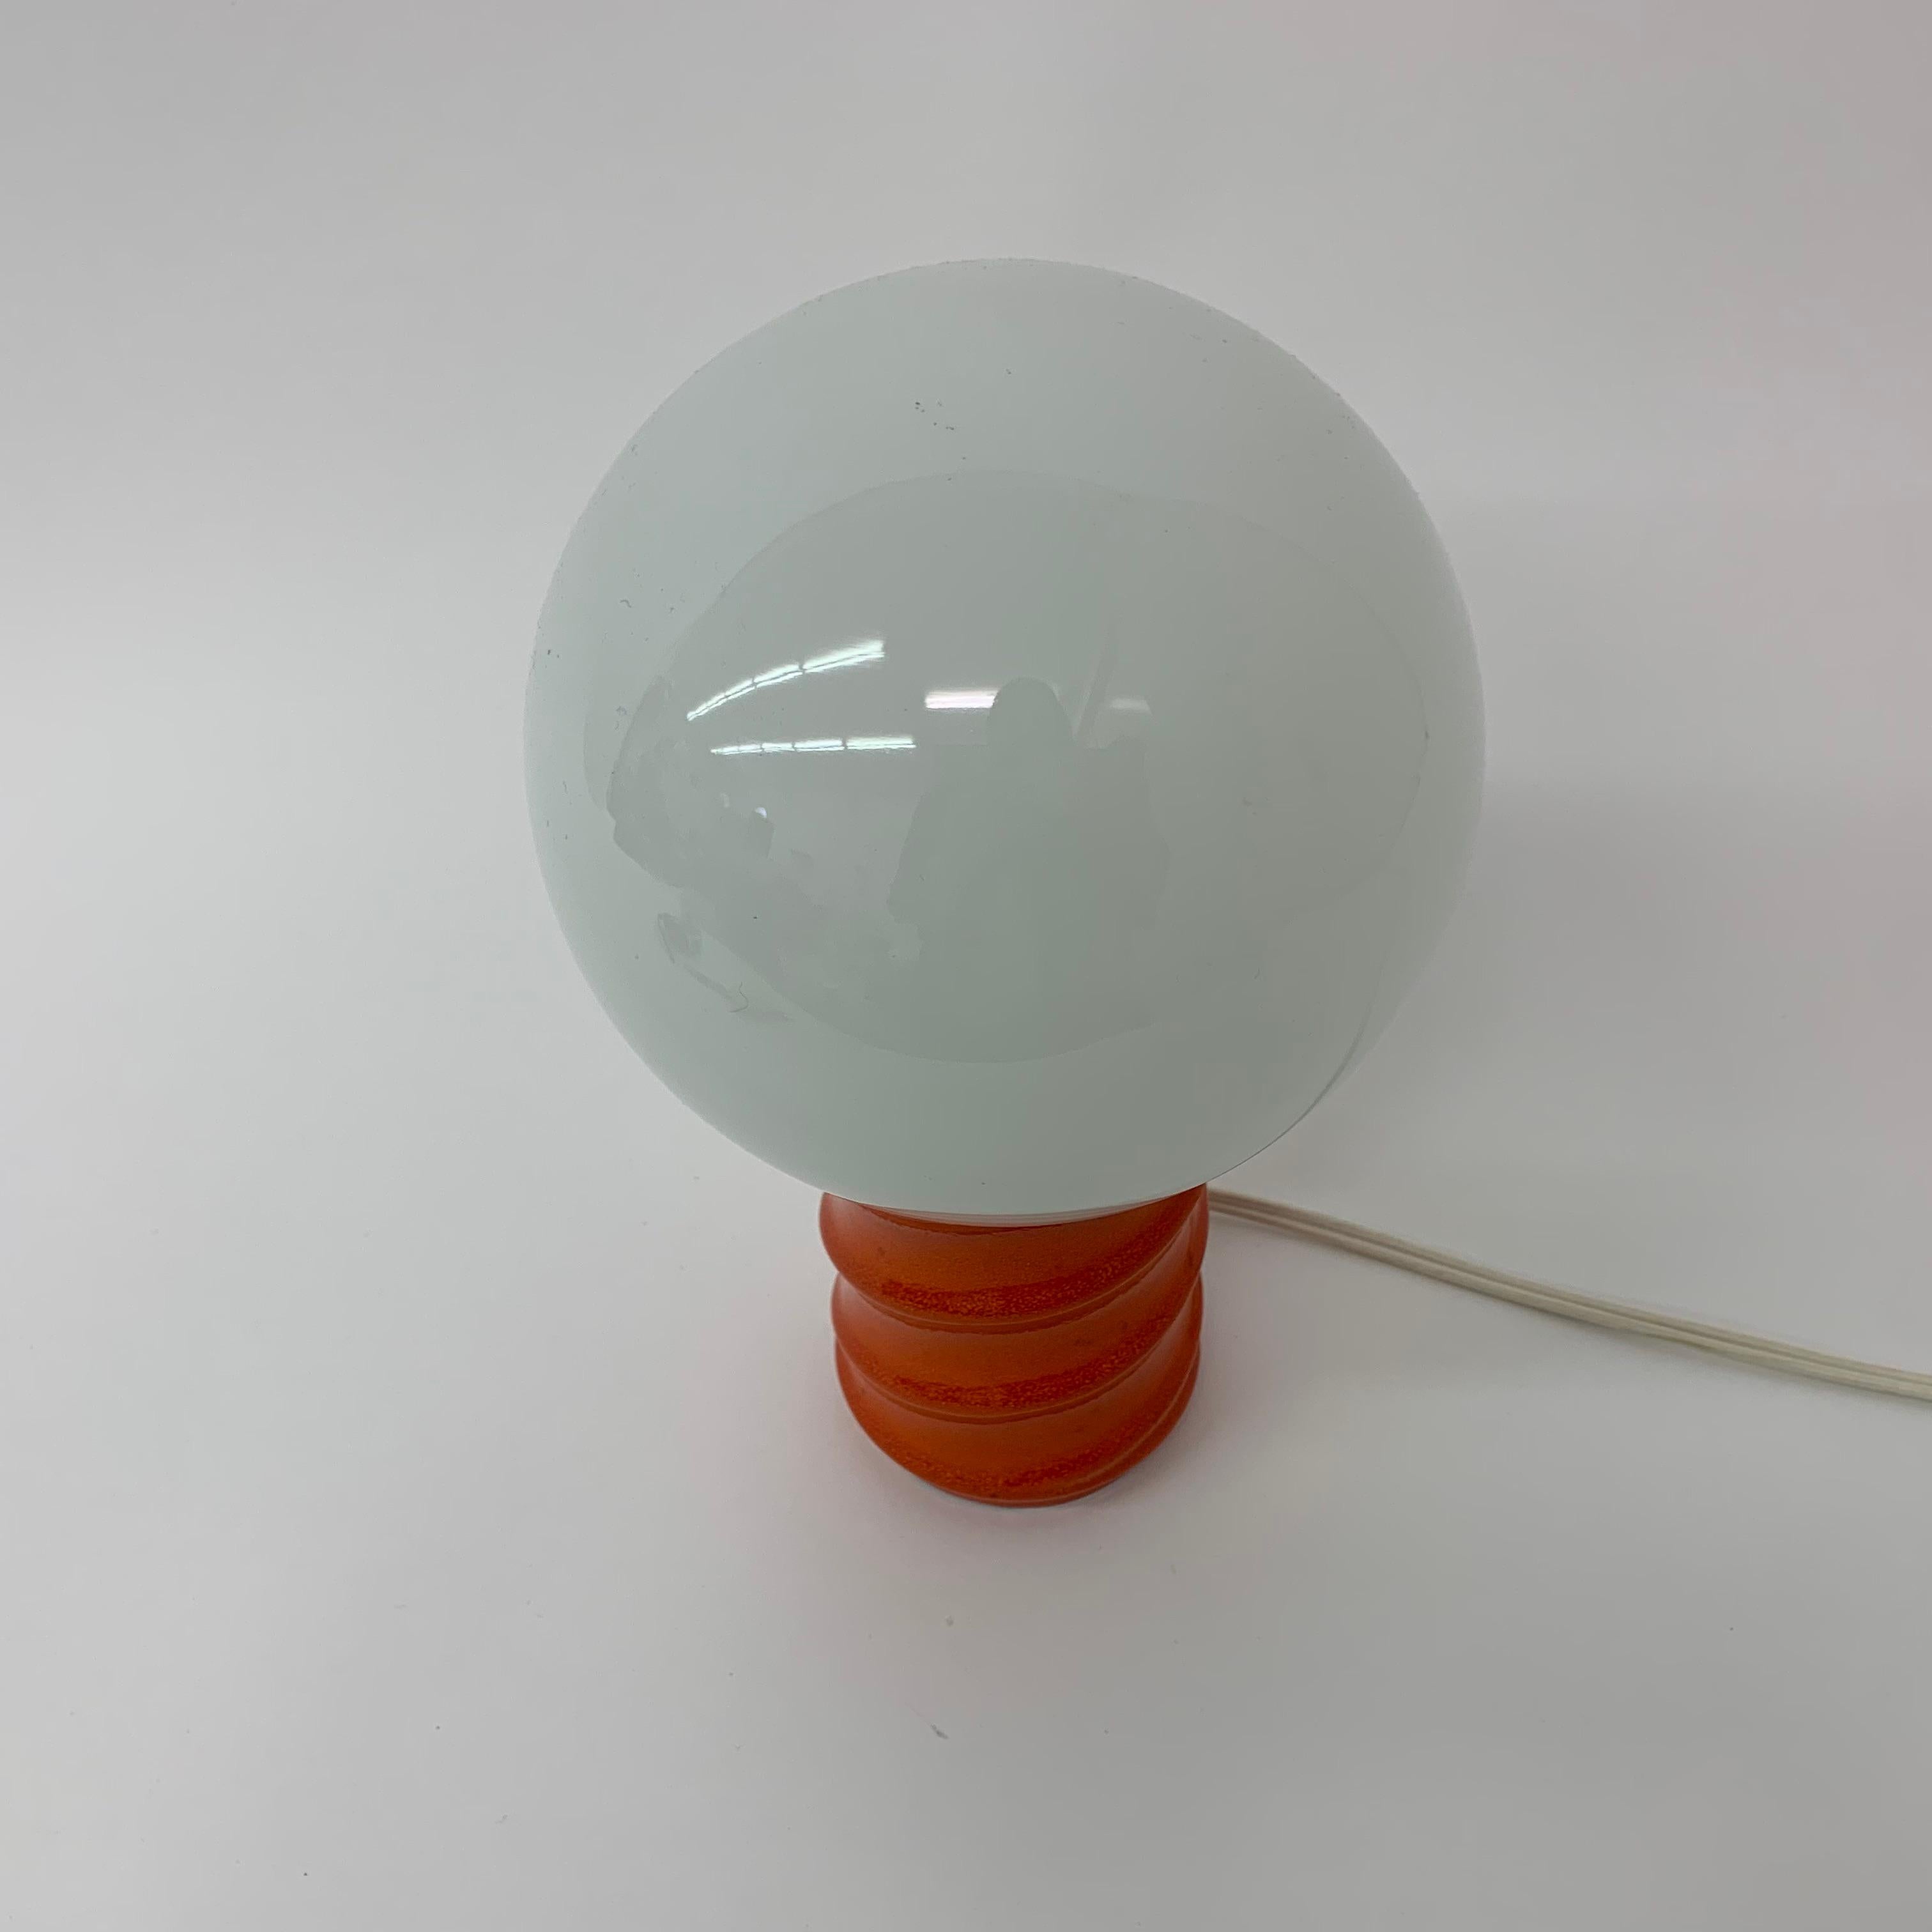 Ceramic Space Age Design Table Lamp, 1970’s For Sale